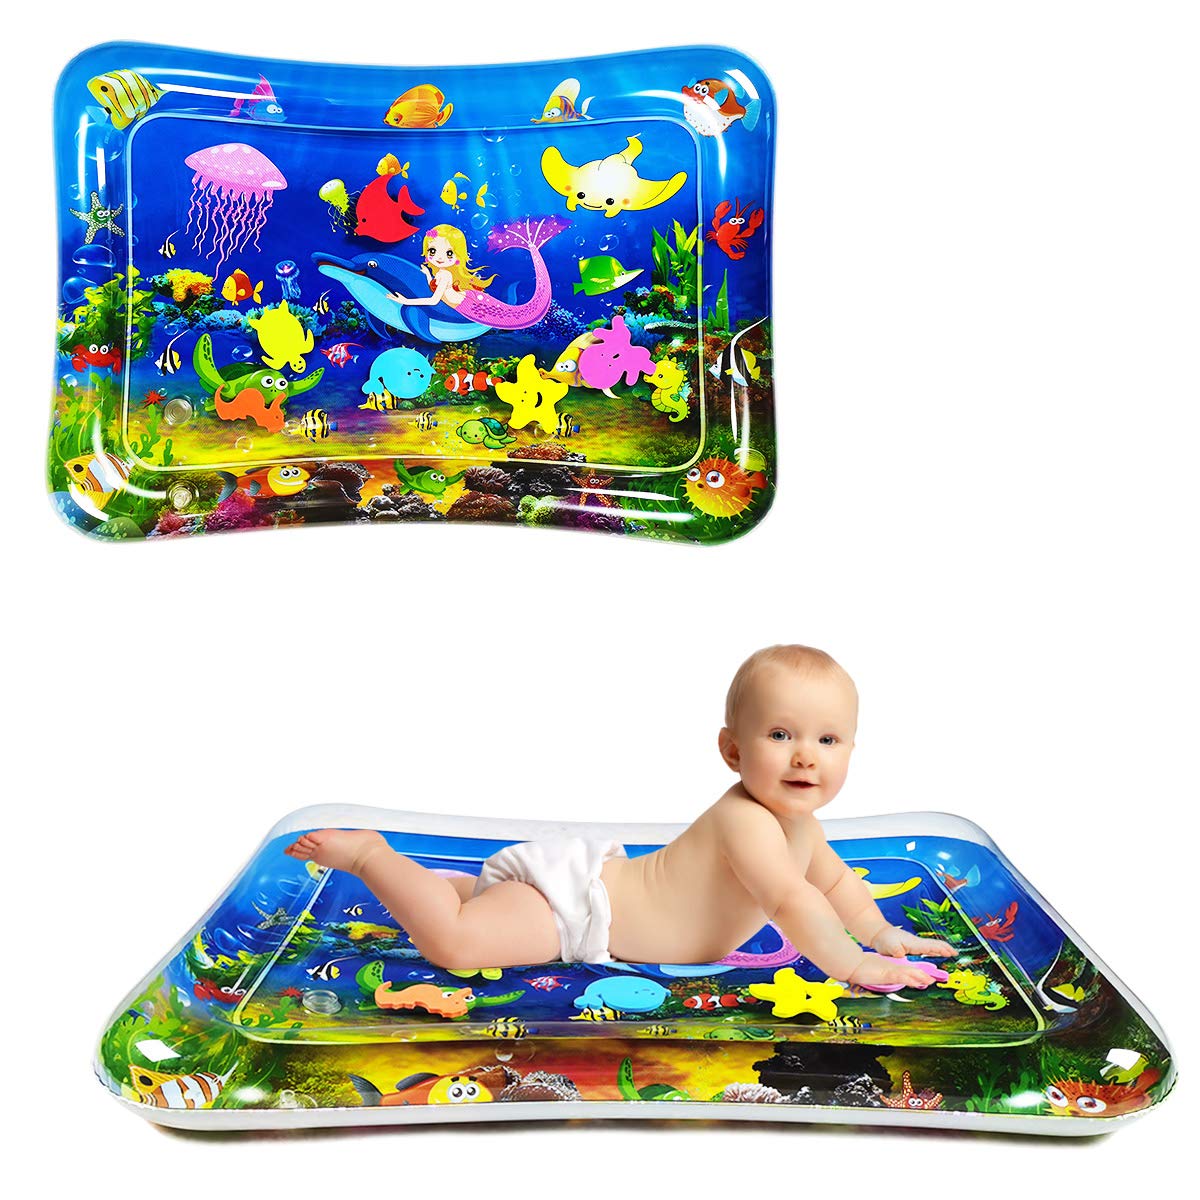 Baby Water mat,Water mat for Babies,Tummy time Toys,Inflatable Play Mat Water Cushion Infant Toys, Fun Early Development Activity Play Center for Newbor(70x50cm)